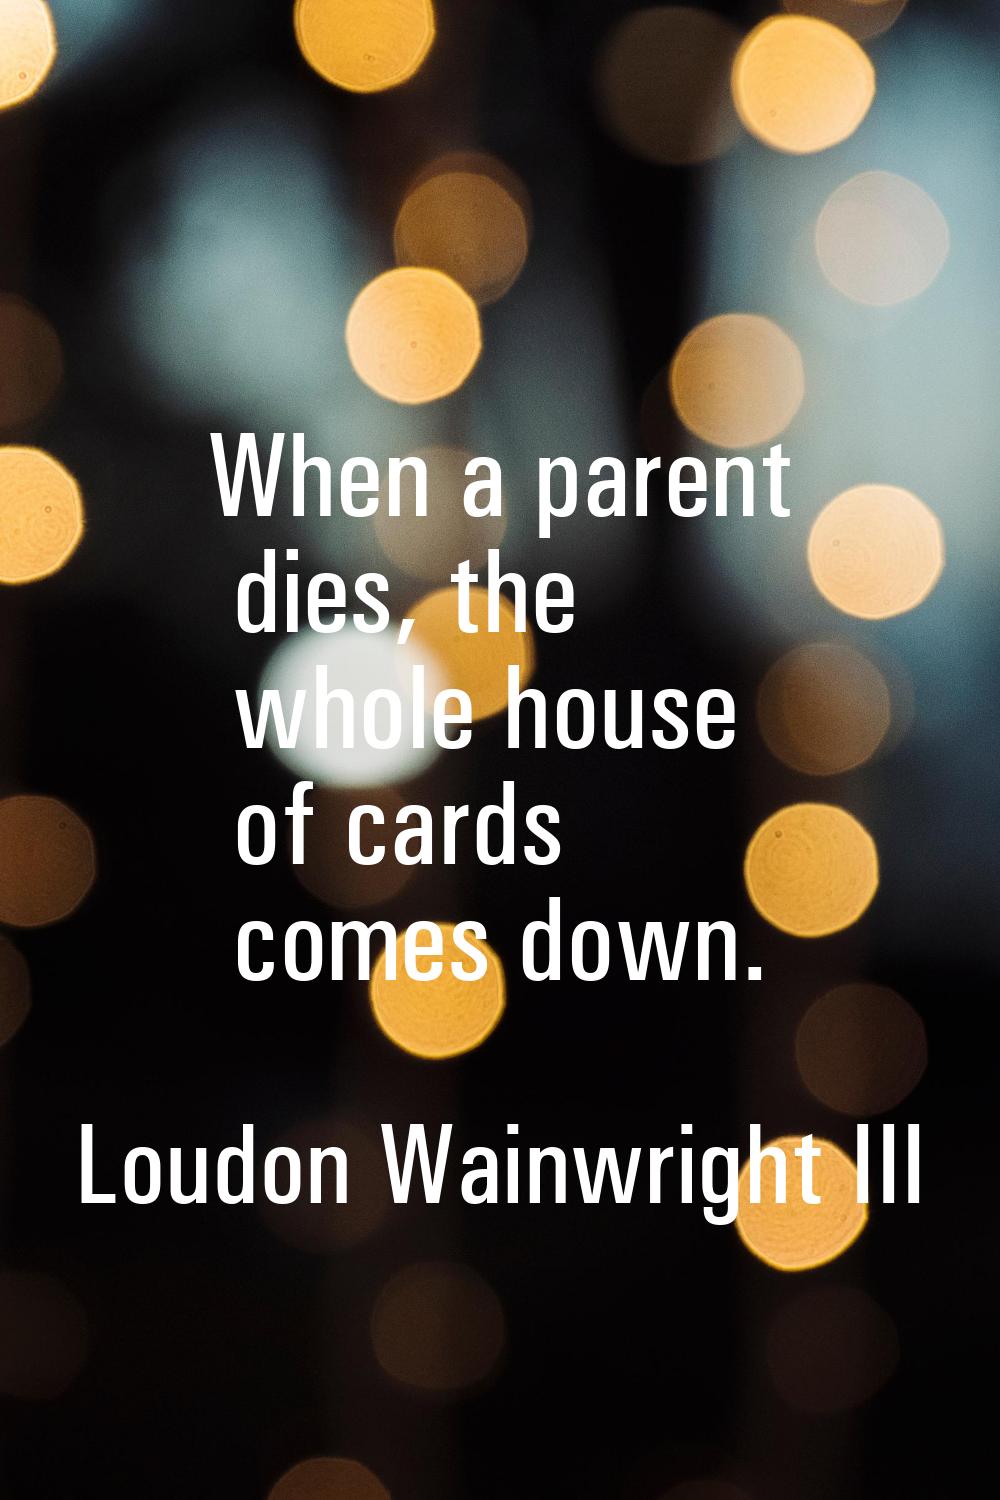 When a parent dies, the whole house of cards comes down.